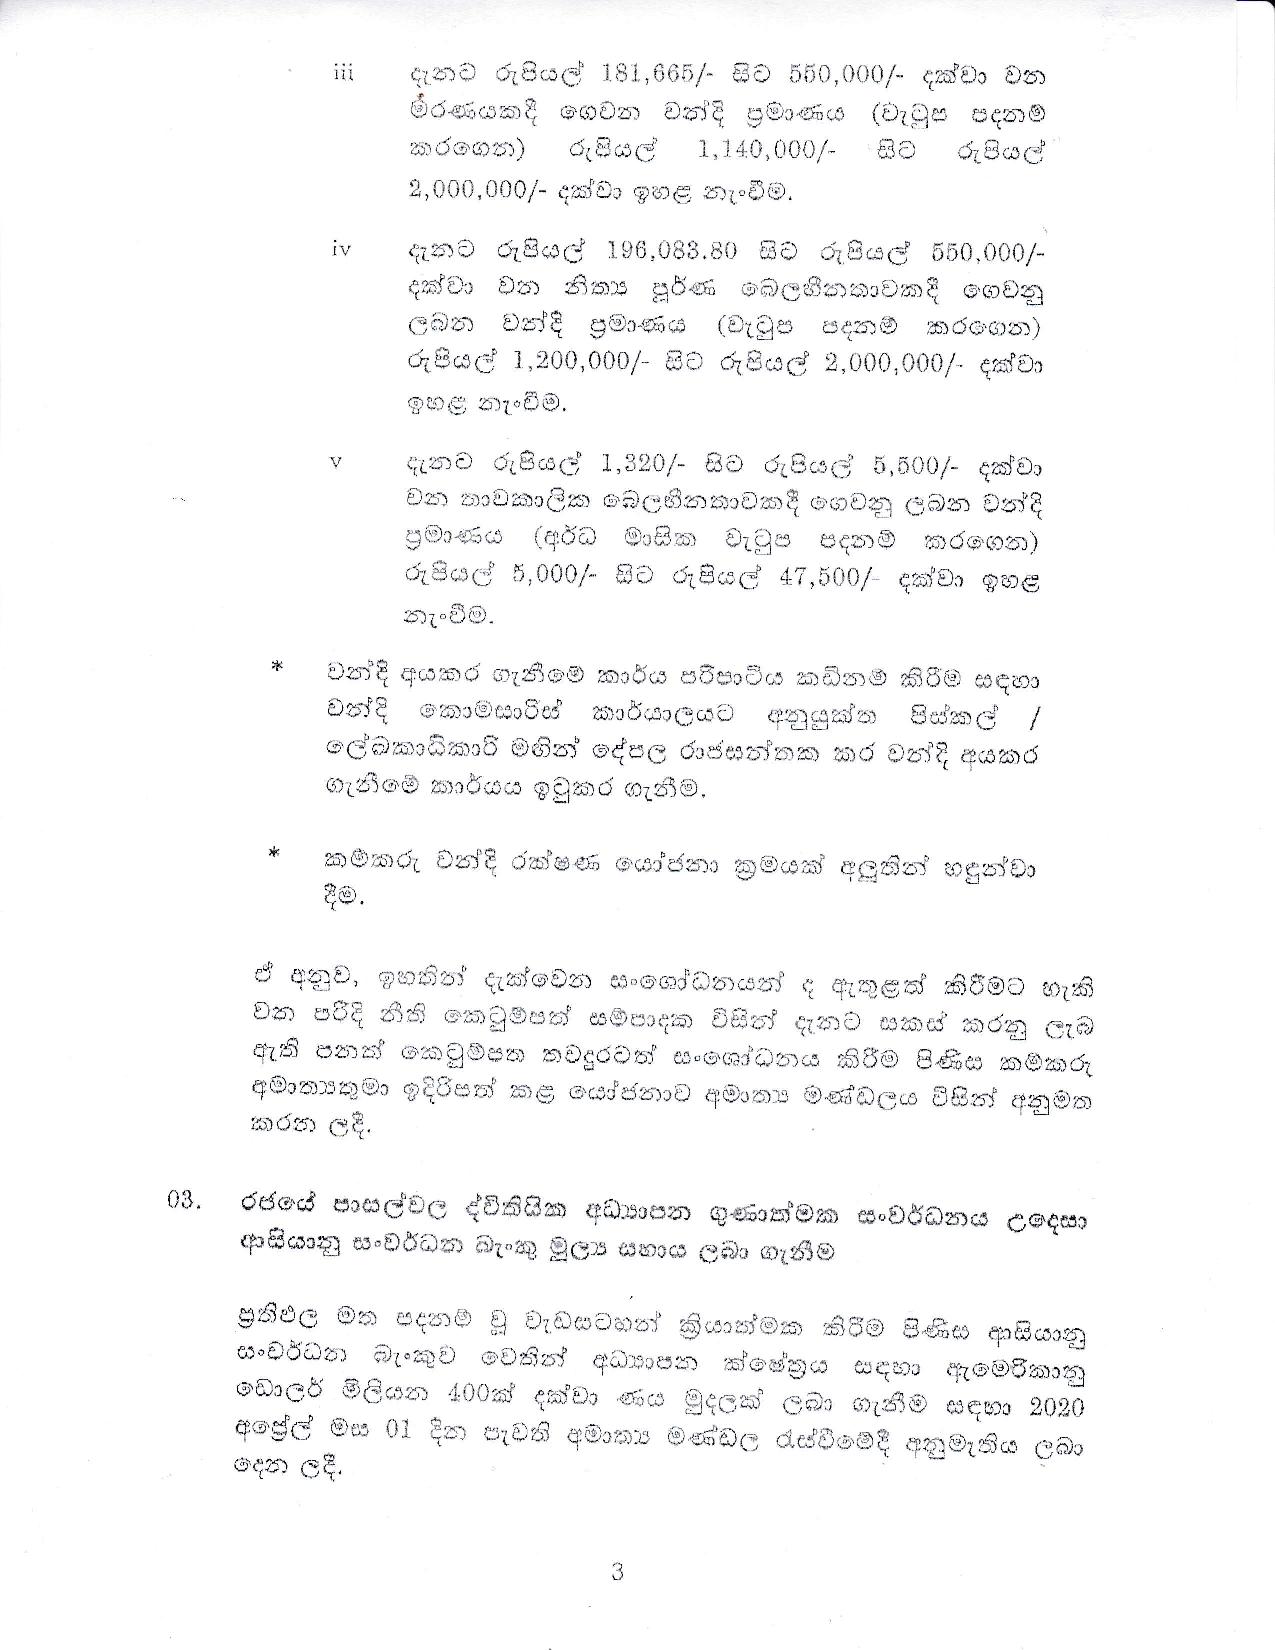 Cabinet Decision on 05.10.2020 page 003